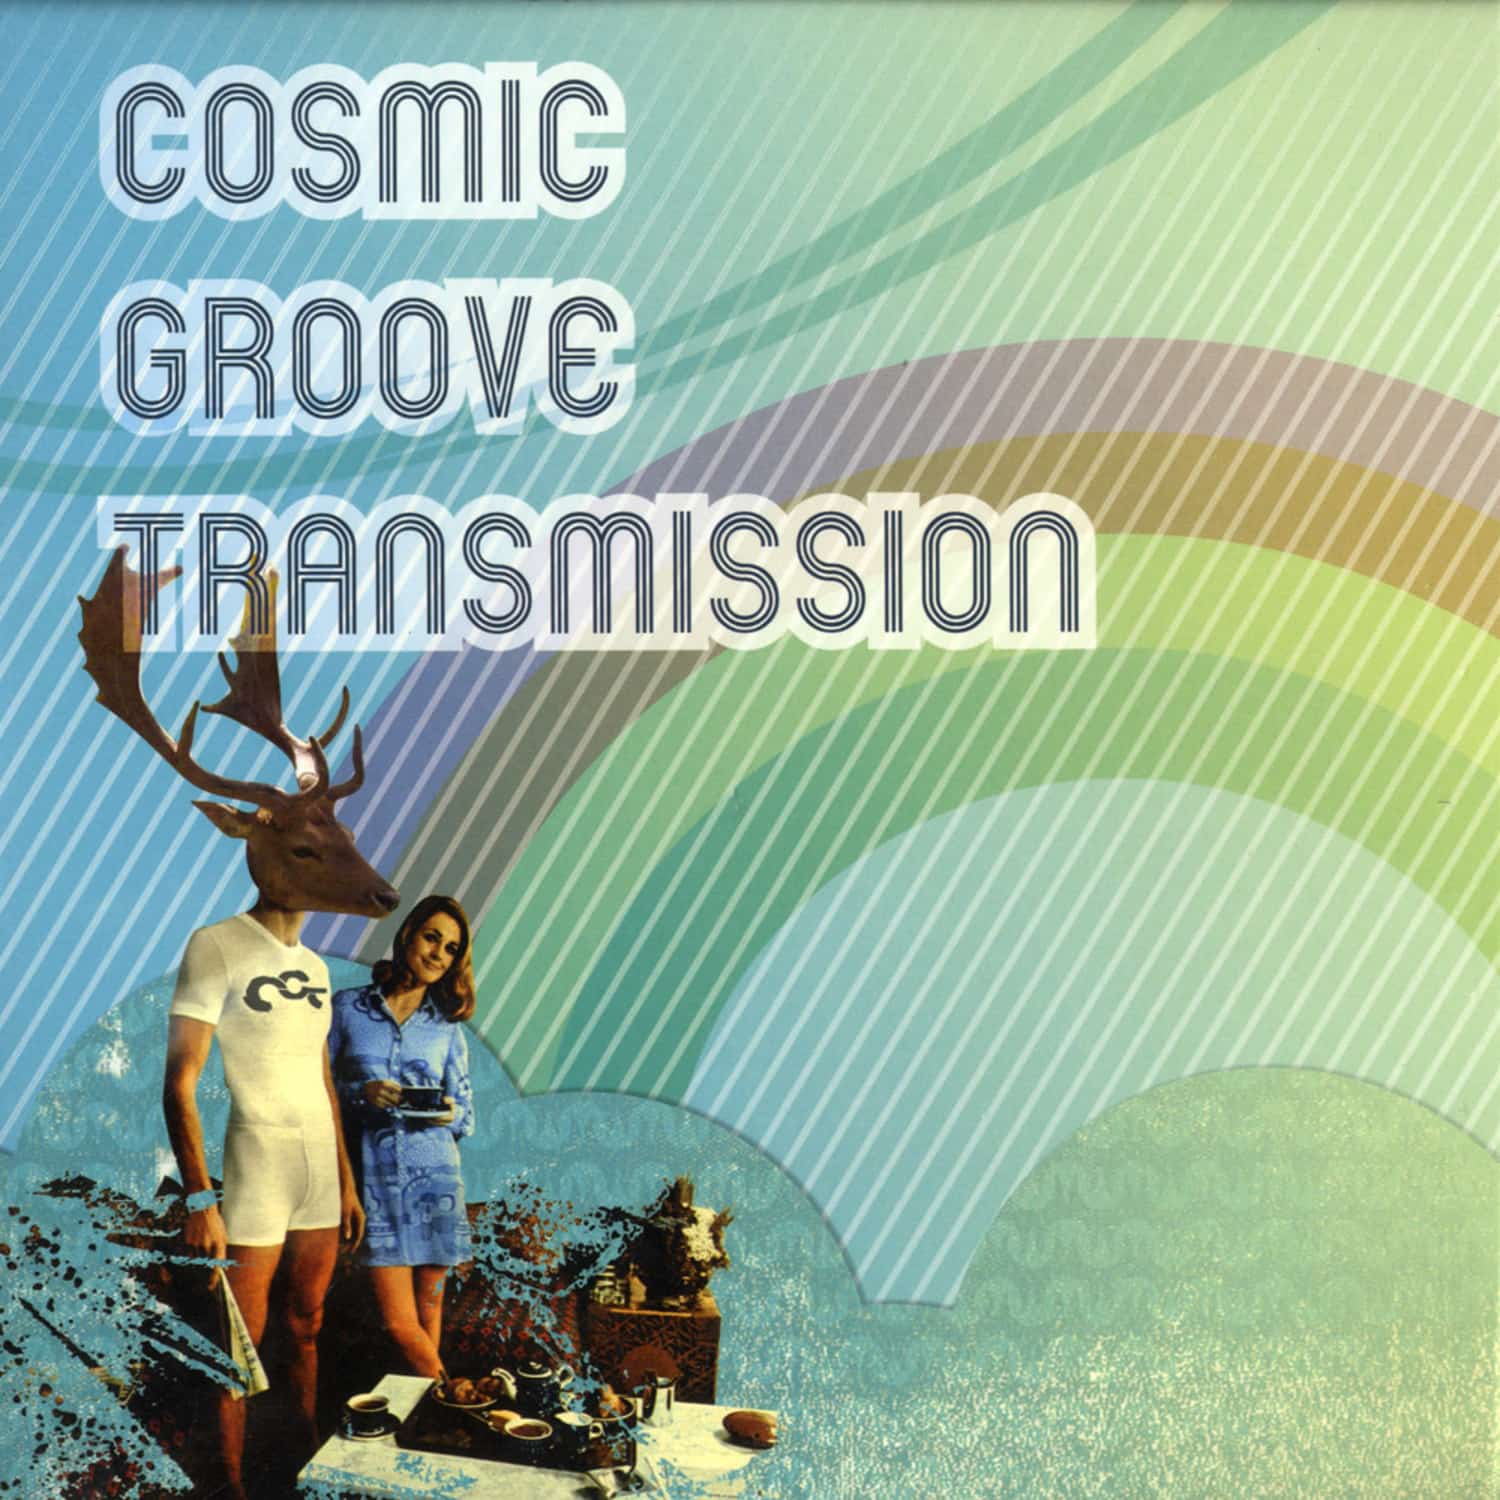 Cosmic Groove Transmission - ITS NOT BLUE